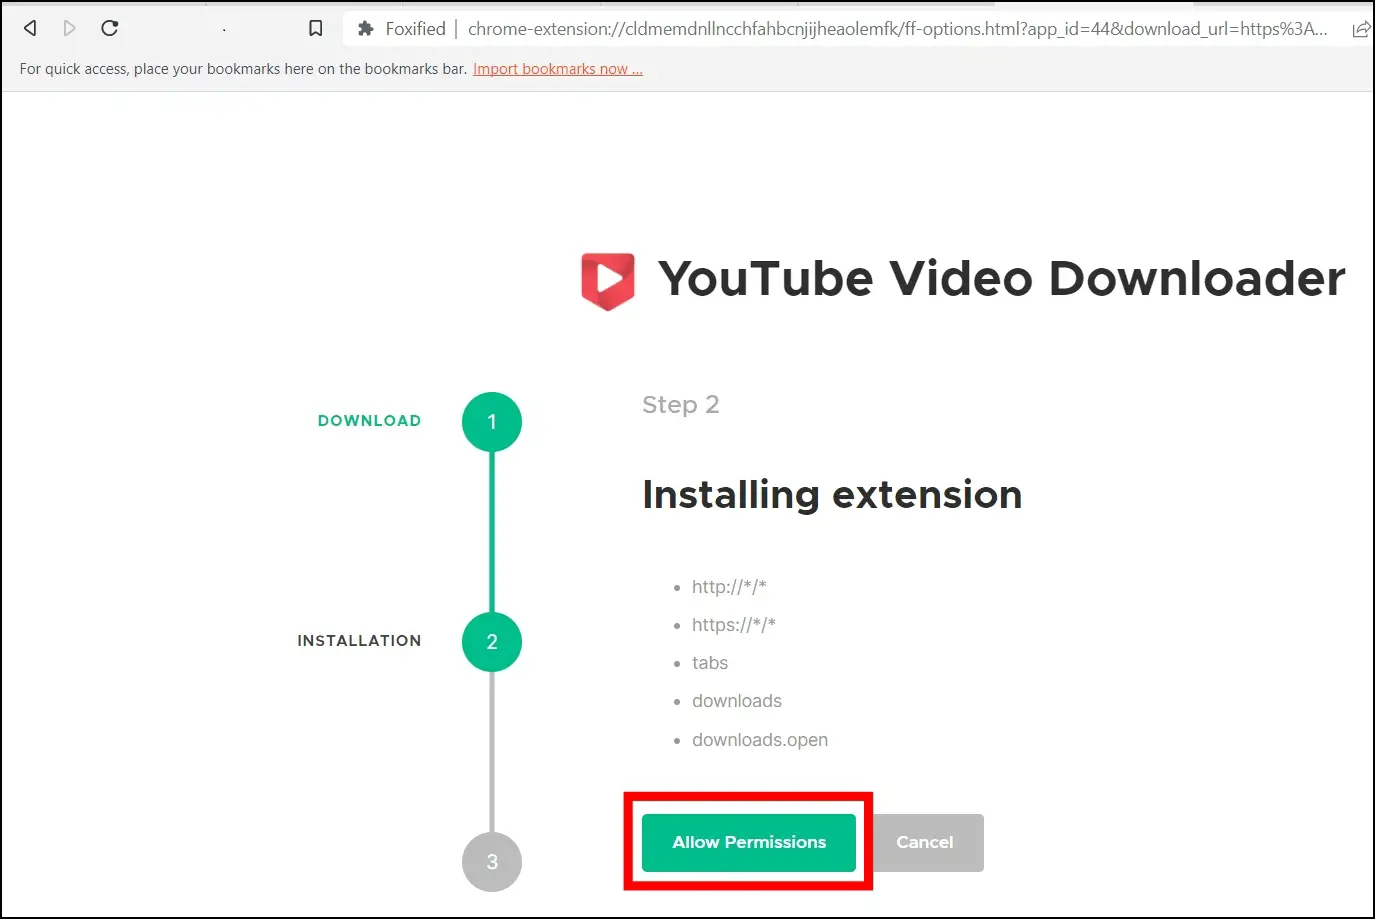 Download Videos on Brave Browser Using Addoncrop's YouTube Video Downloader Extension